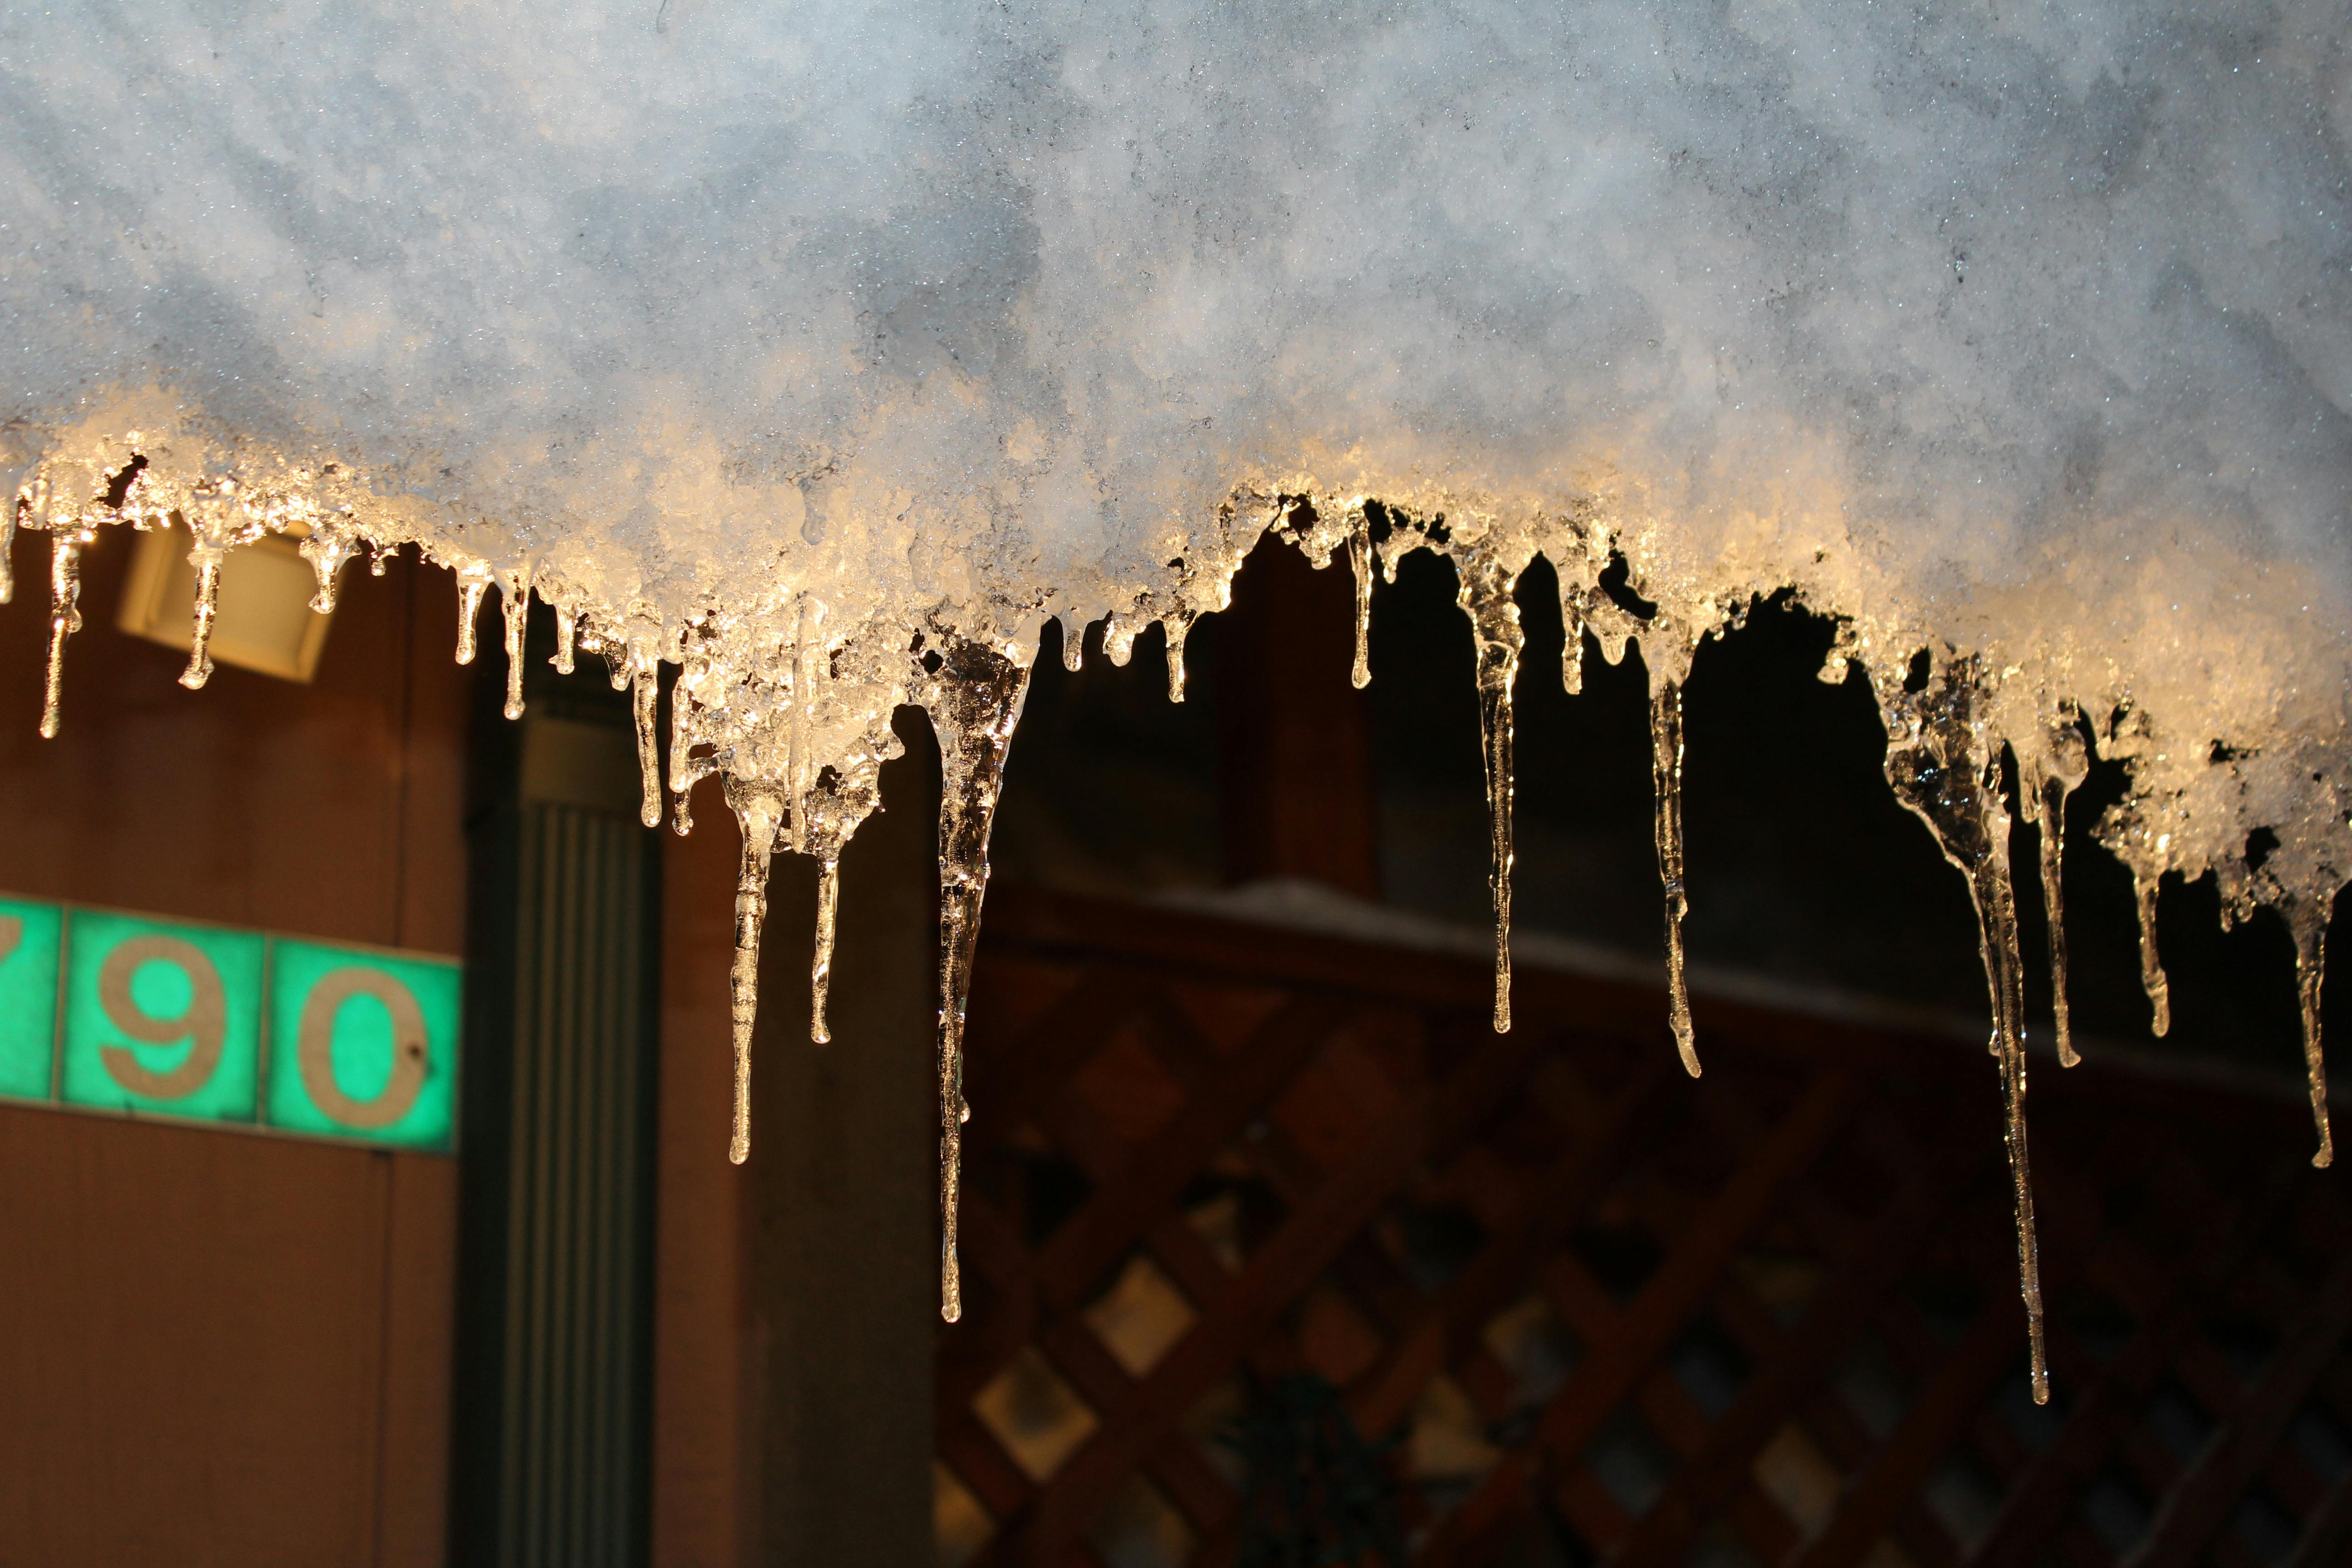 Free stock photo of Lit up Icicles